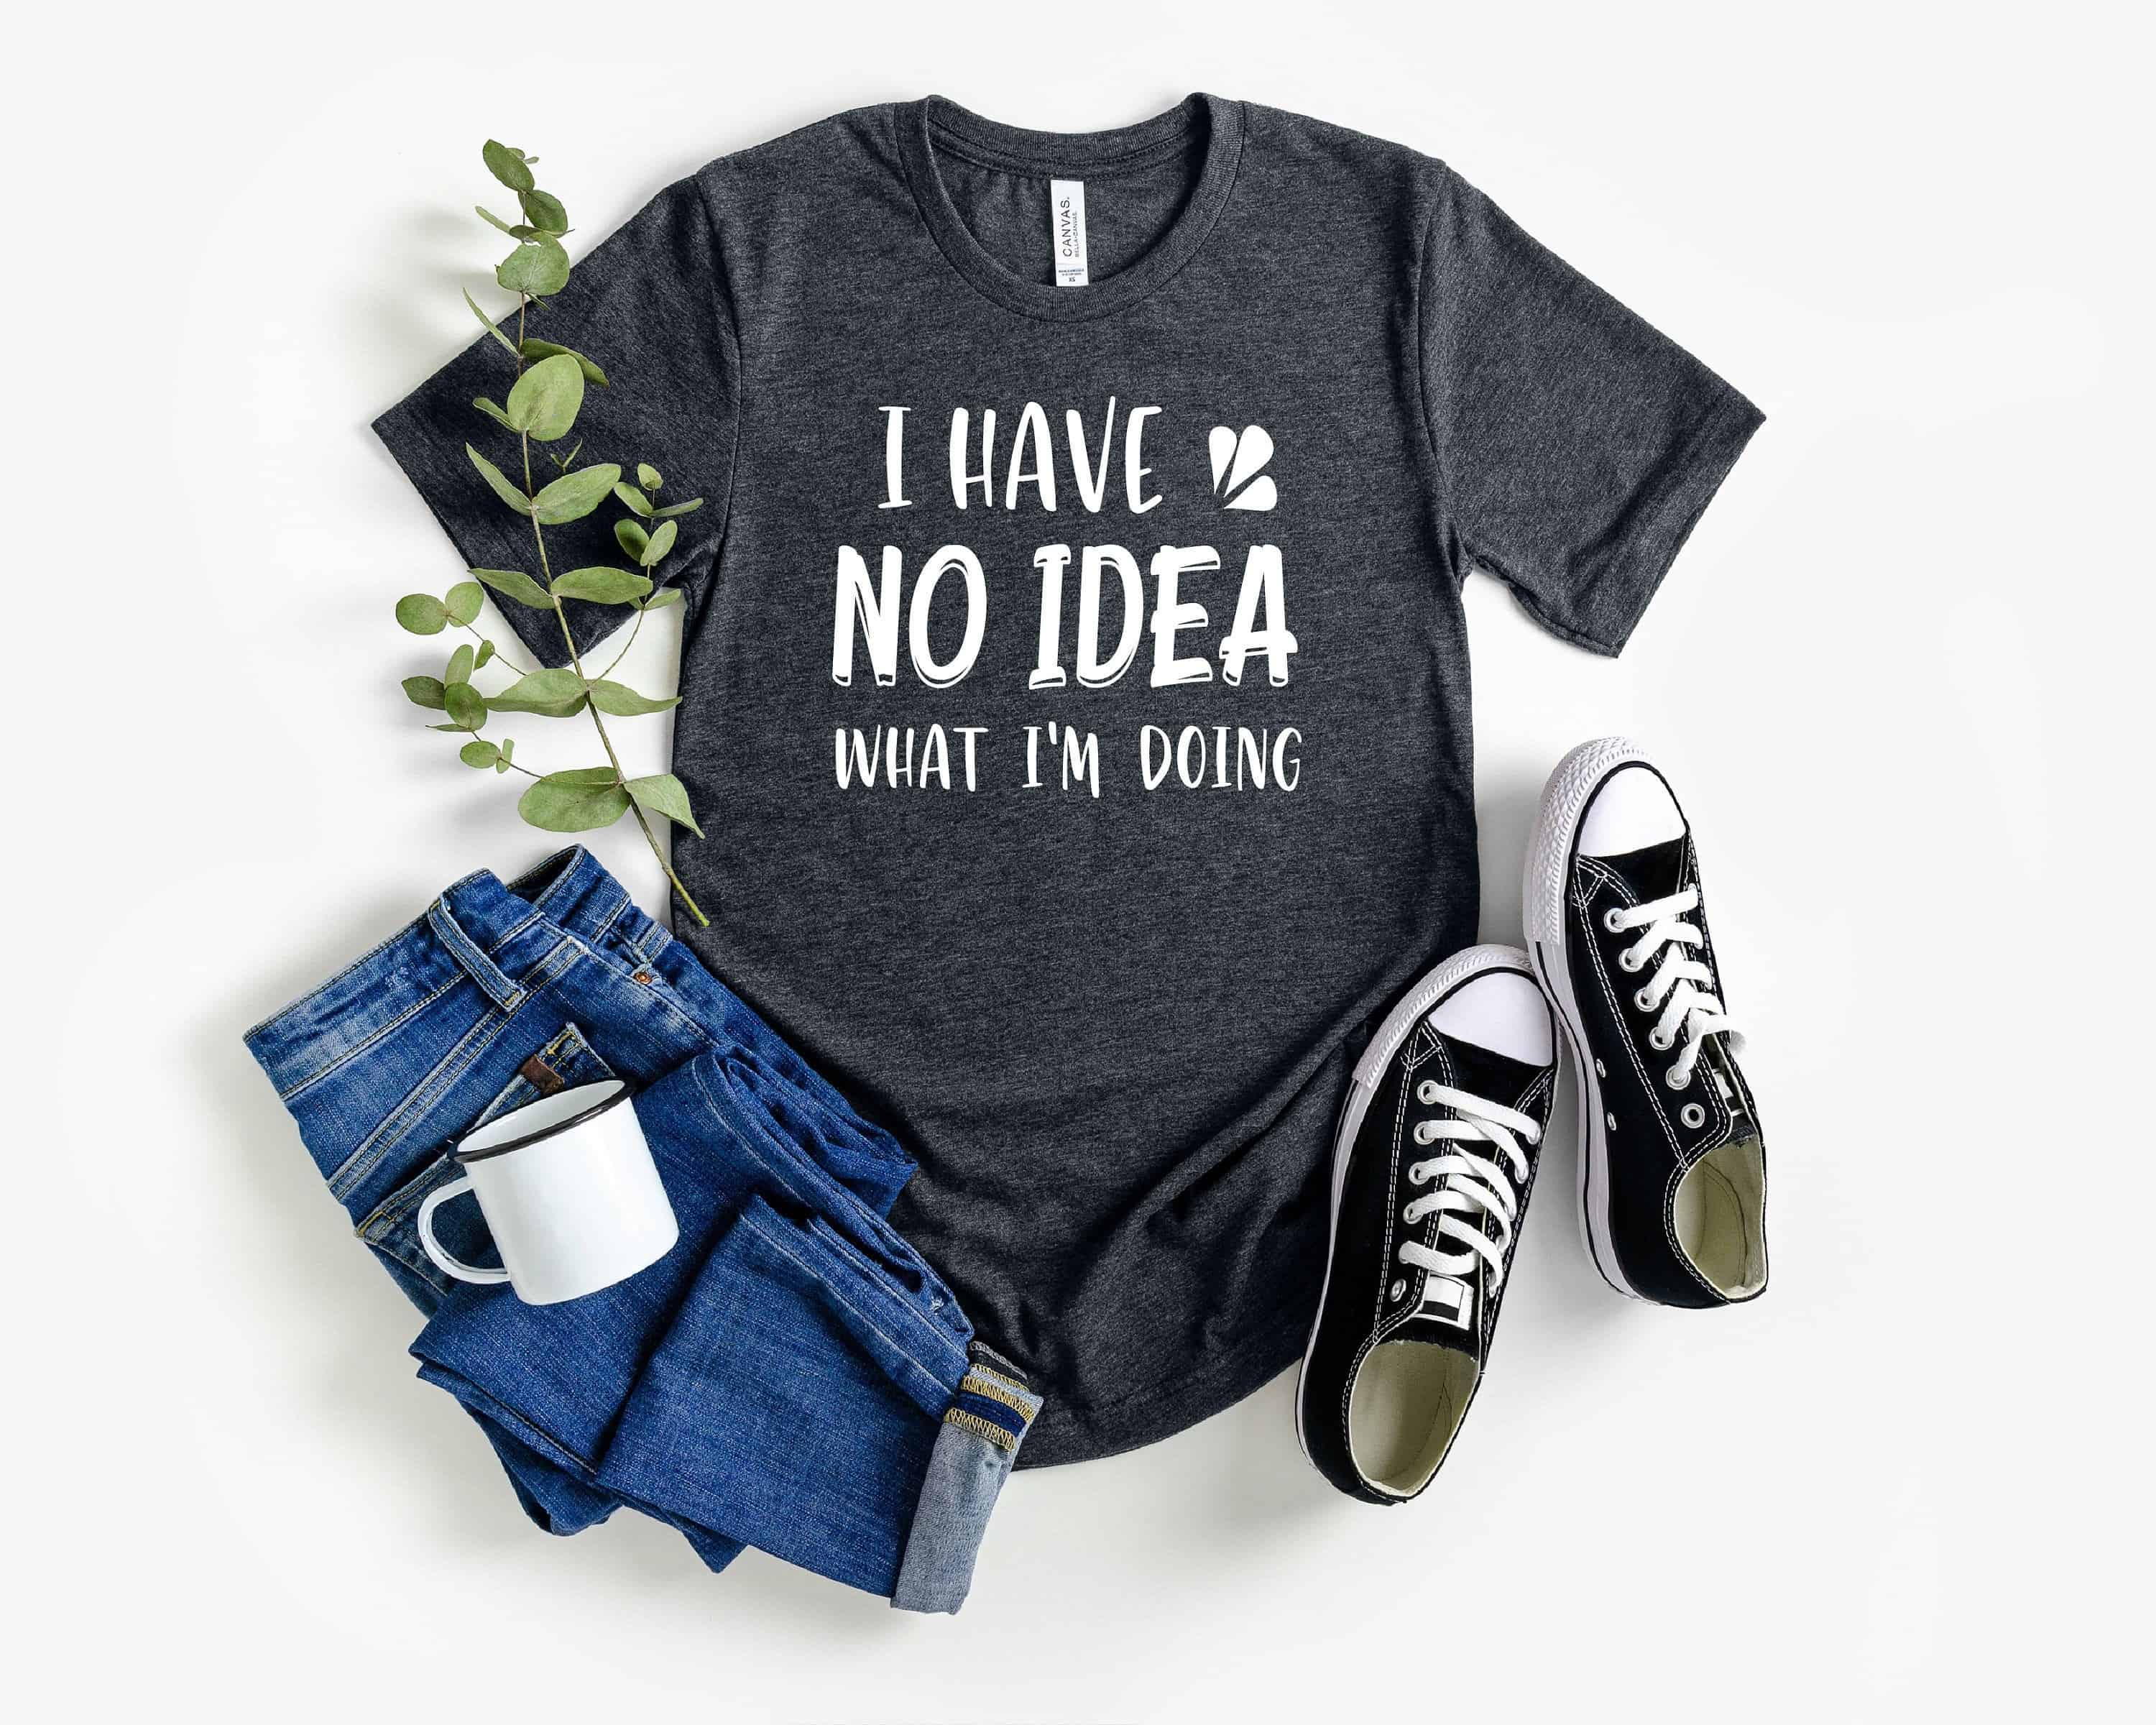 Funny Shirts For Men